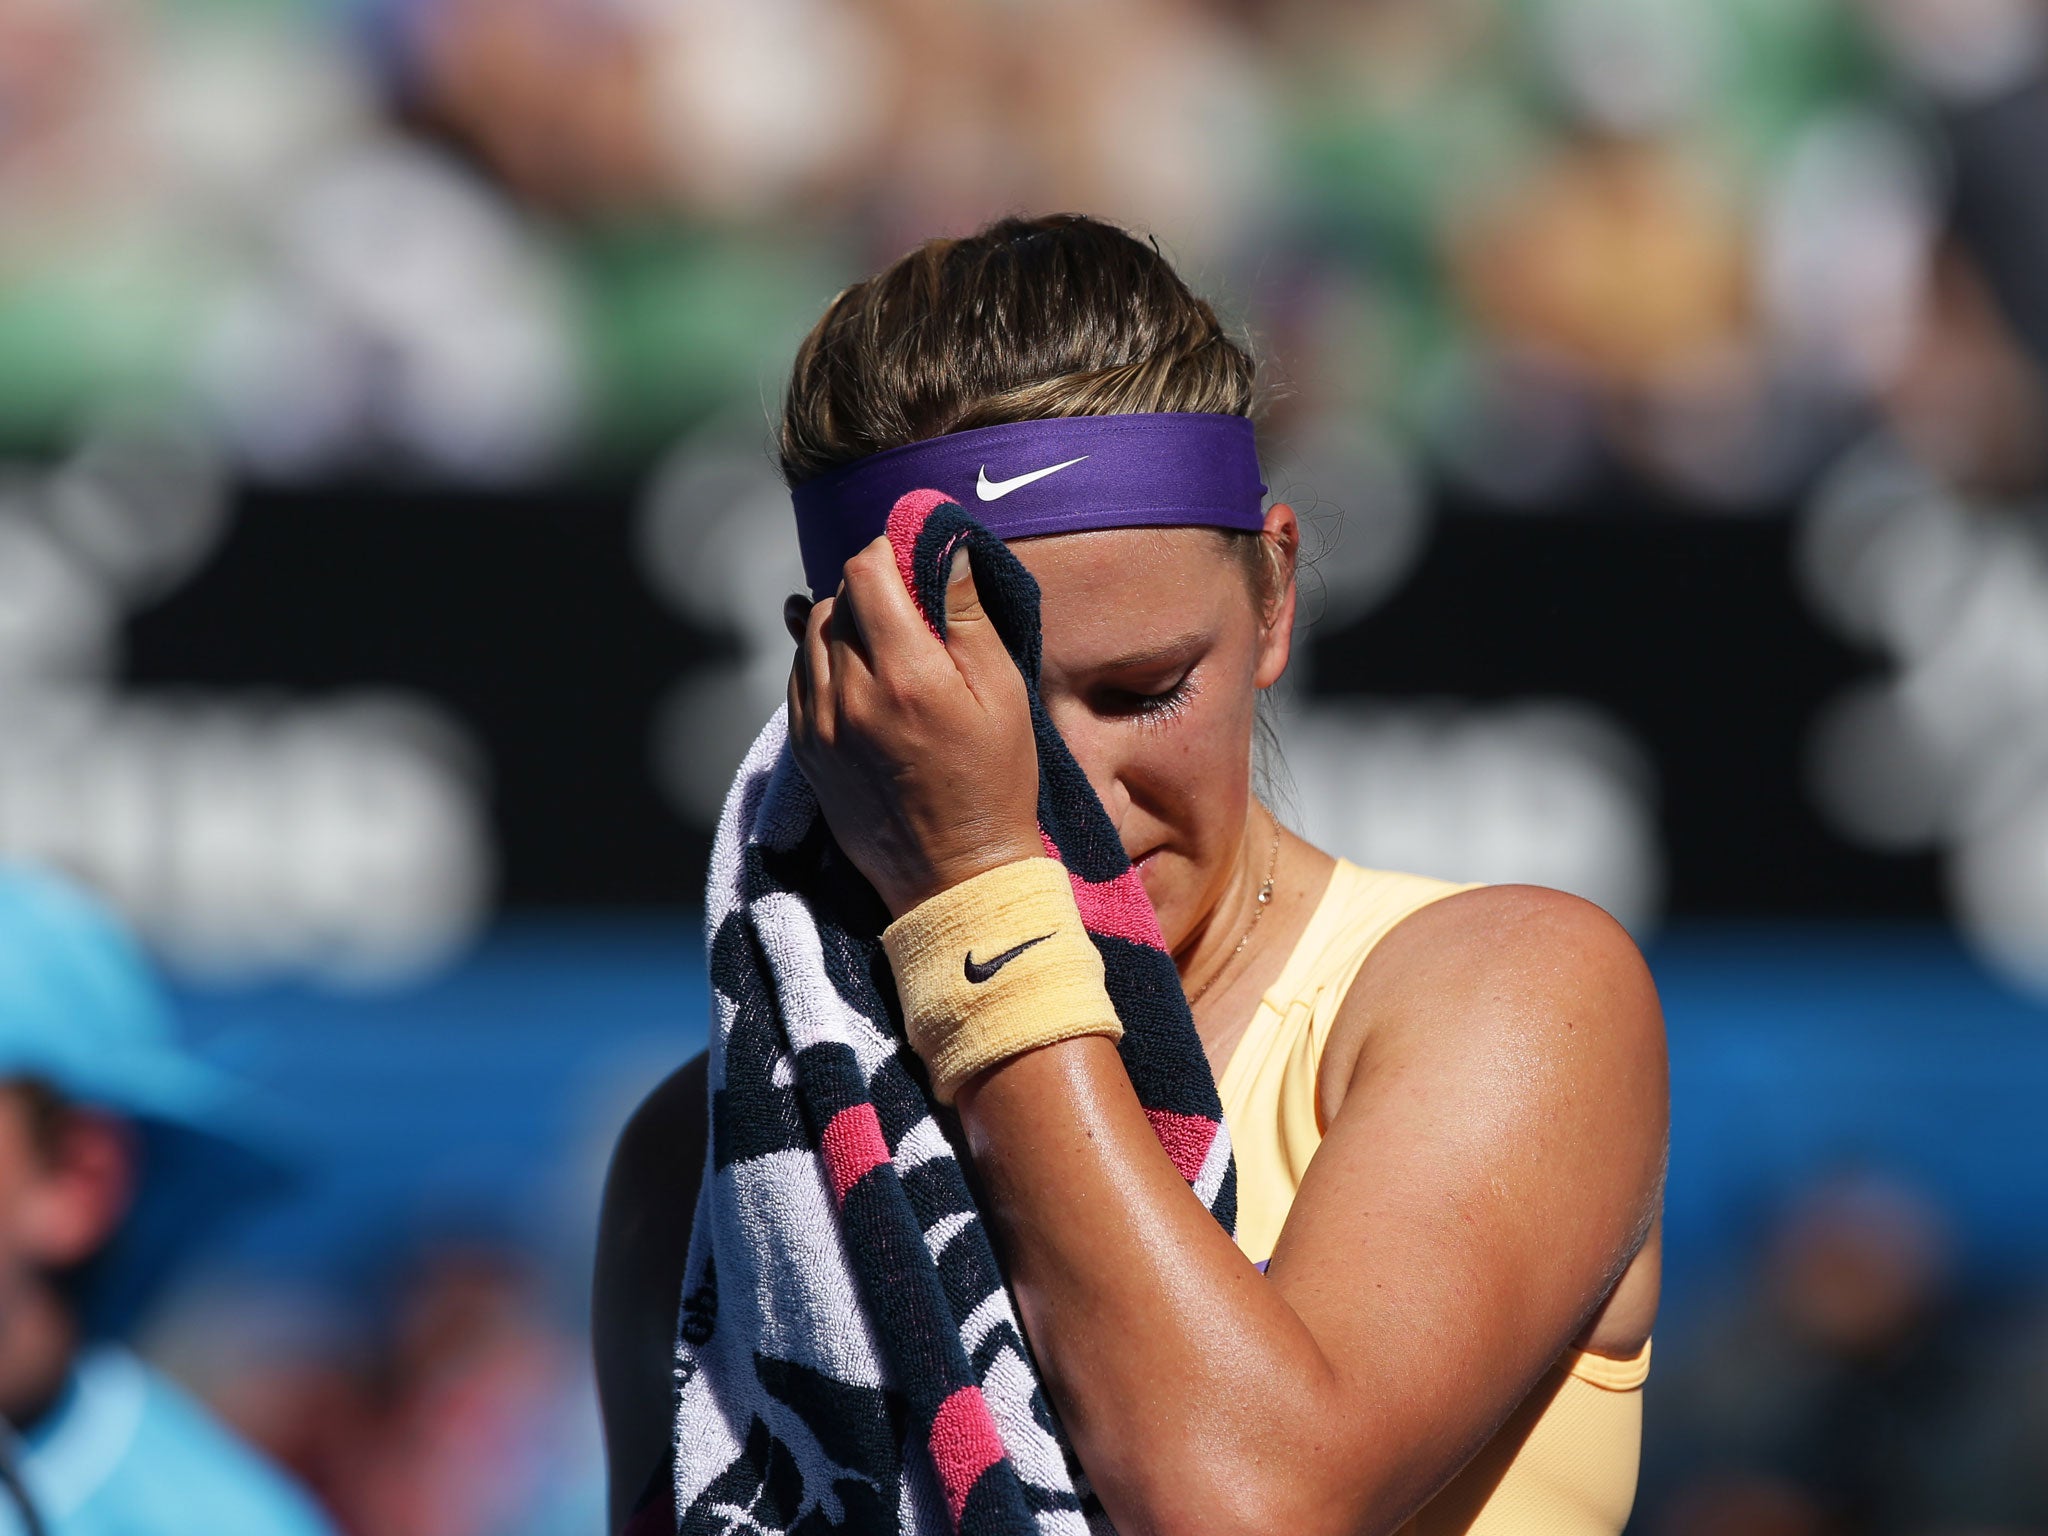 Victoria Azarenka is likely to be given a frosty reception when the defending champion takes on Li Na in tomorrow’s final of the Australian Open